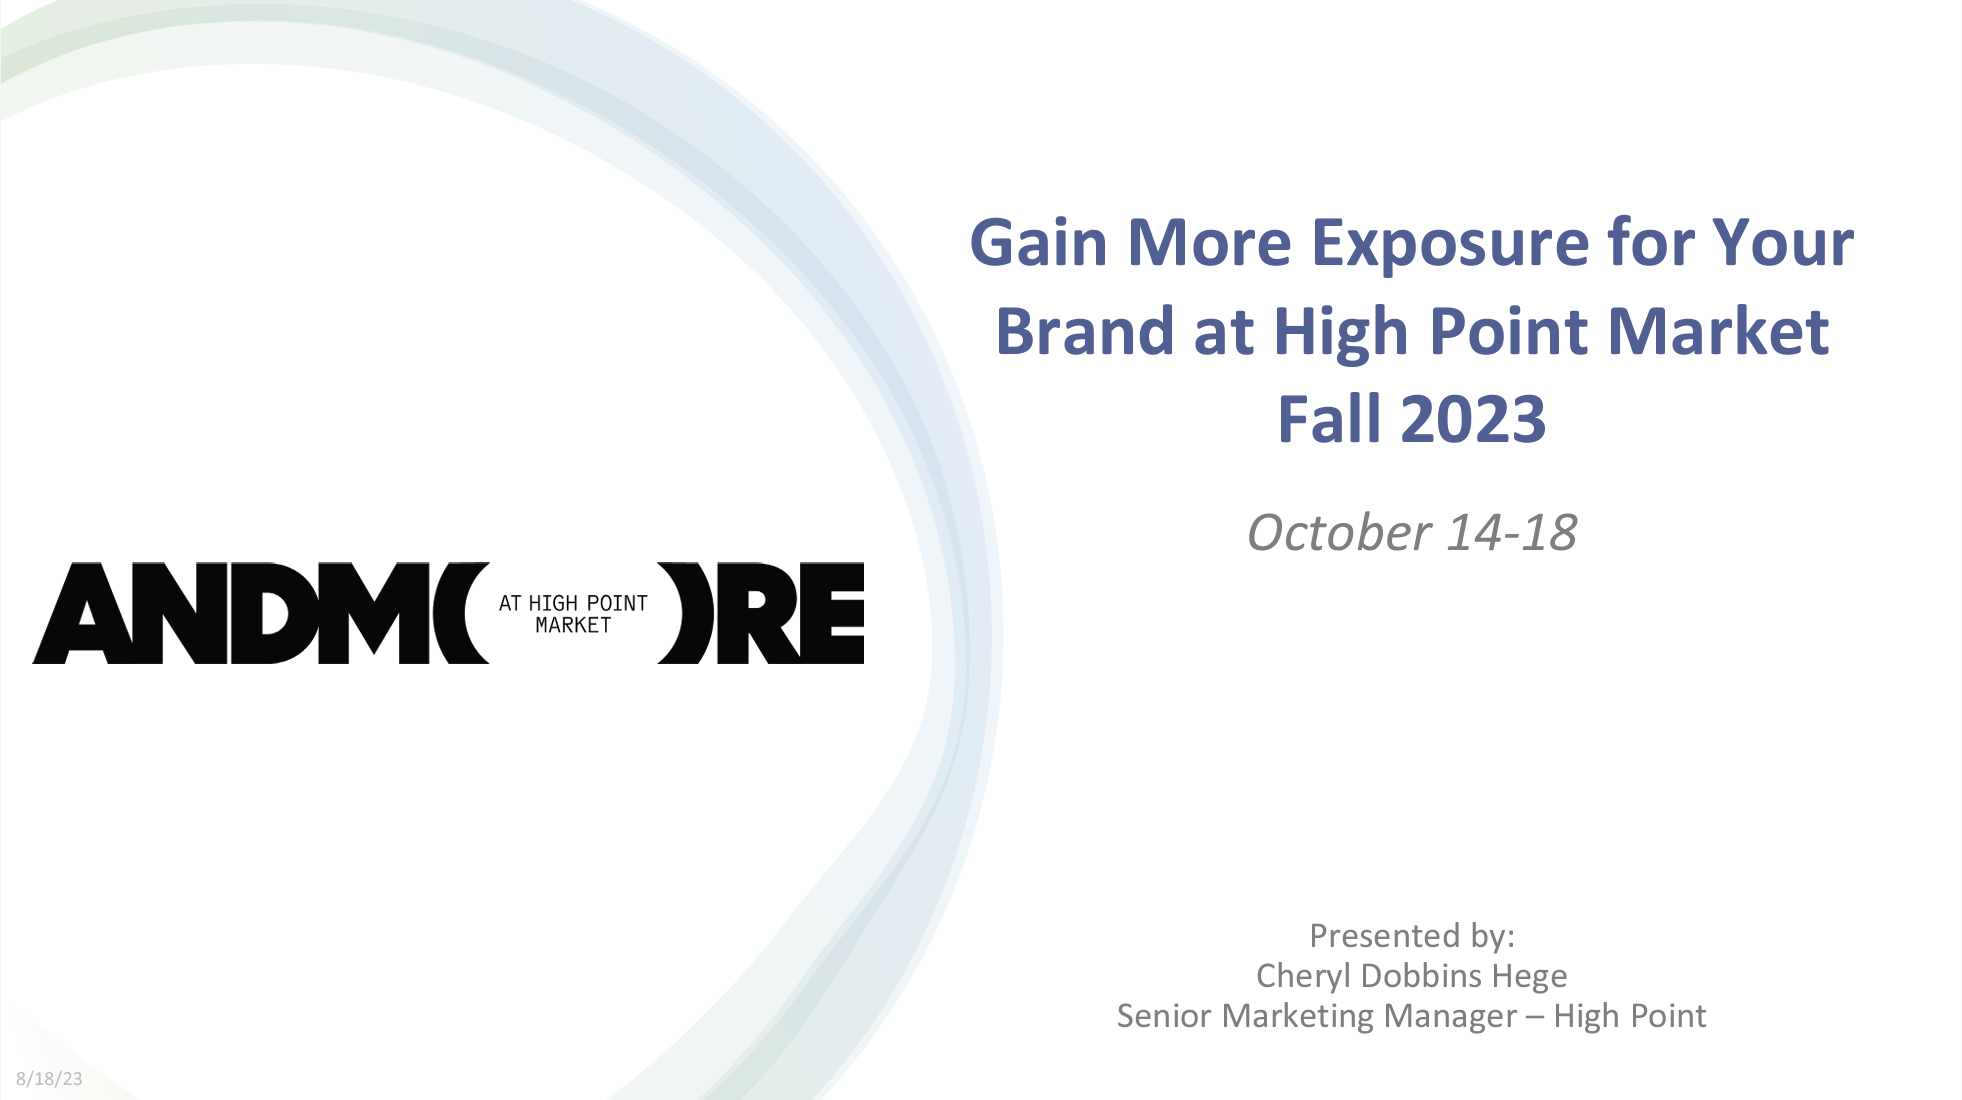 Gain More Exposure for Your Brand at High Point Market Fall 2023